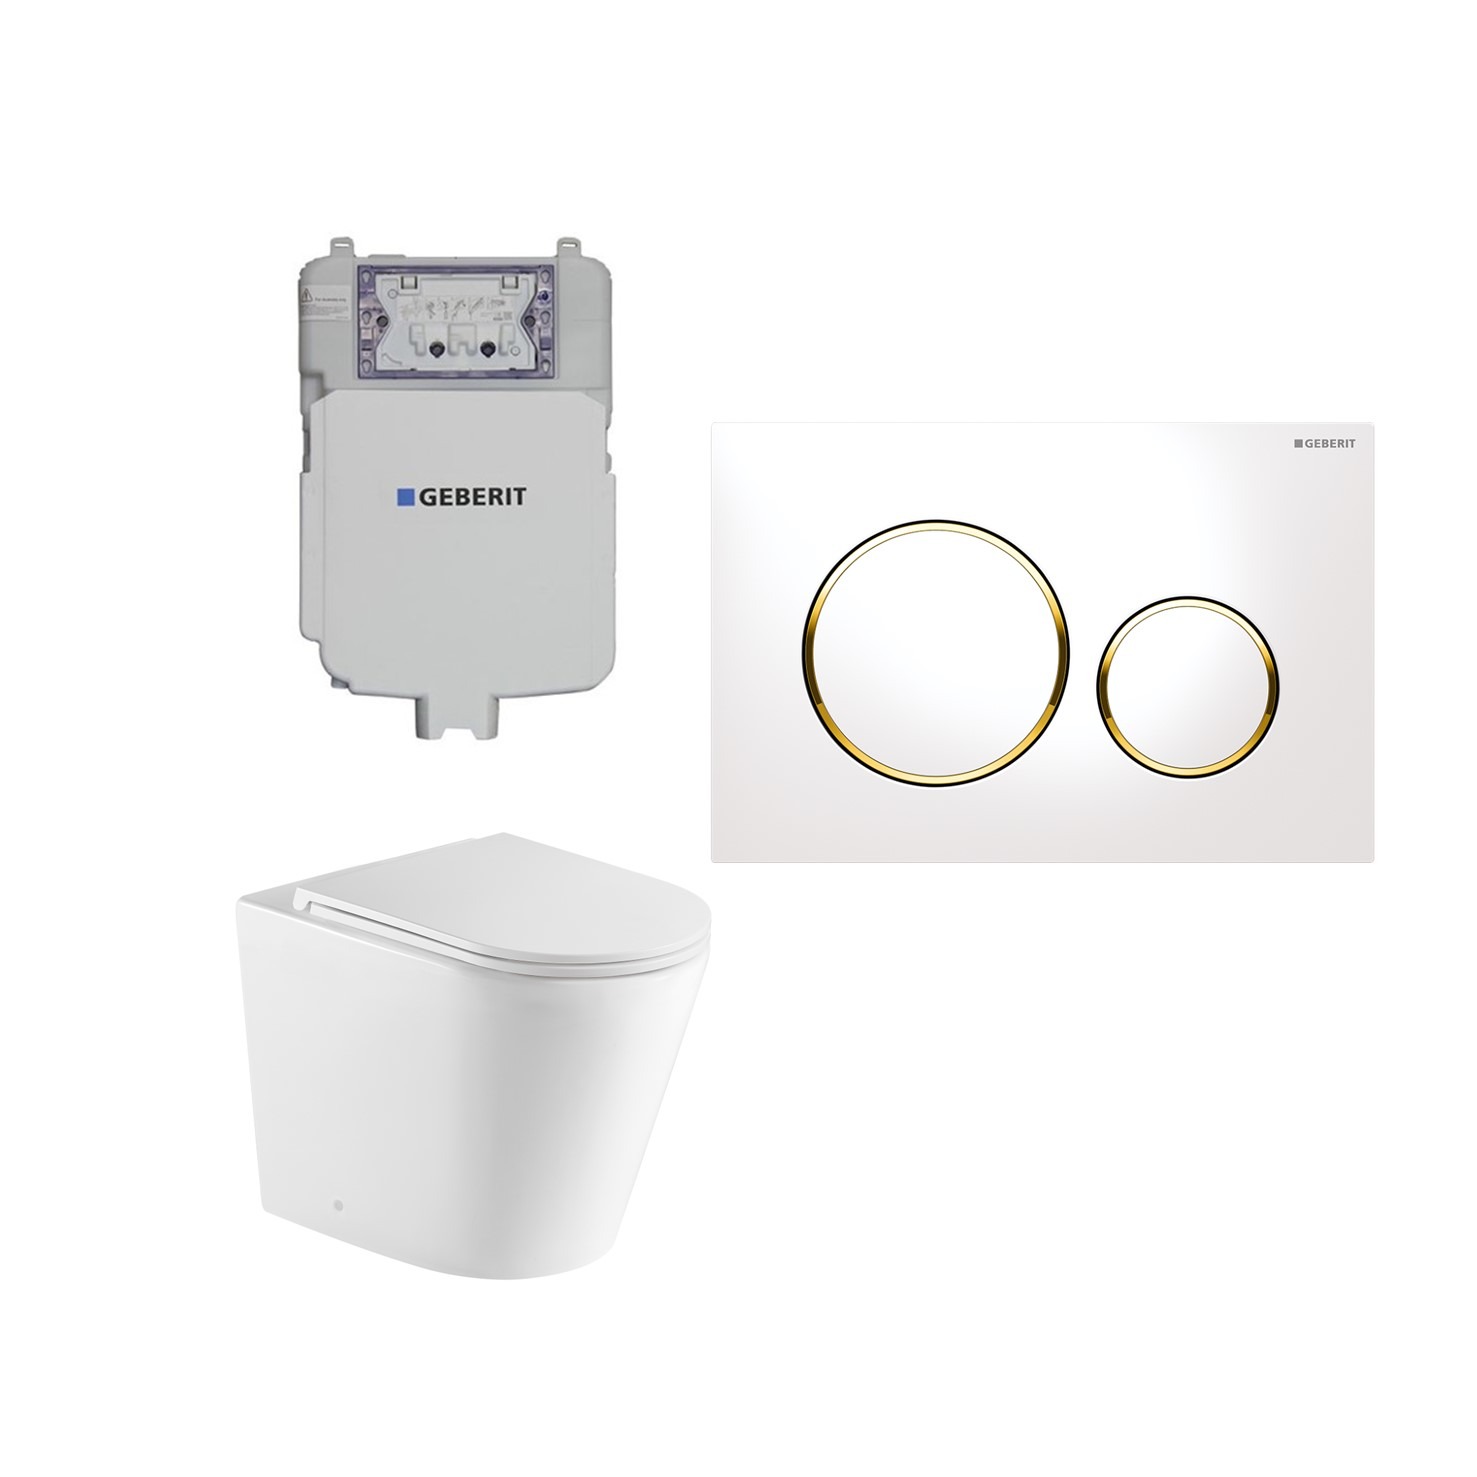 Geberit Sigma 8 Aluca Tornado Rimless In Wall Cistern Toilet Suite with White Button Gold Trim